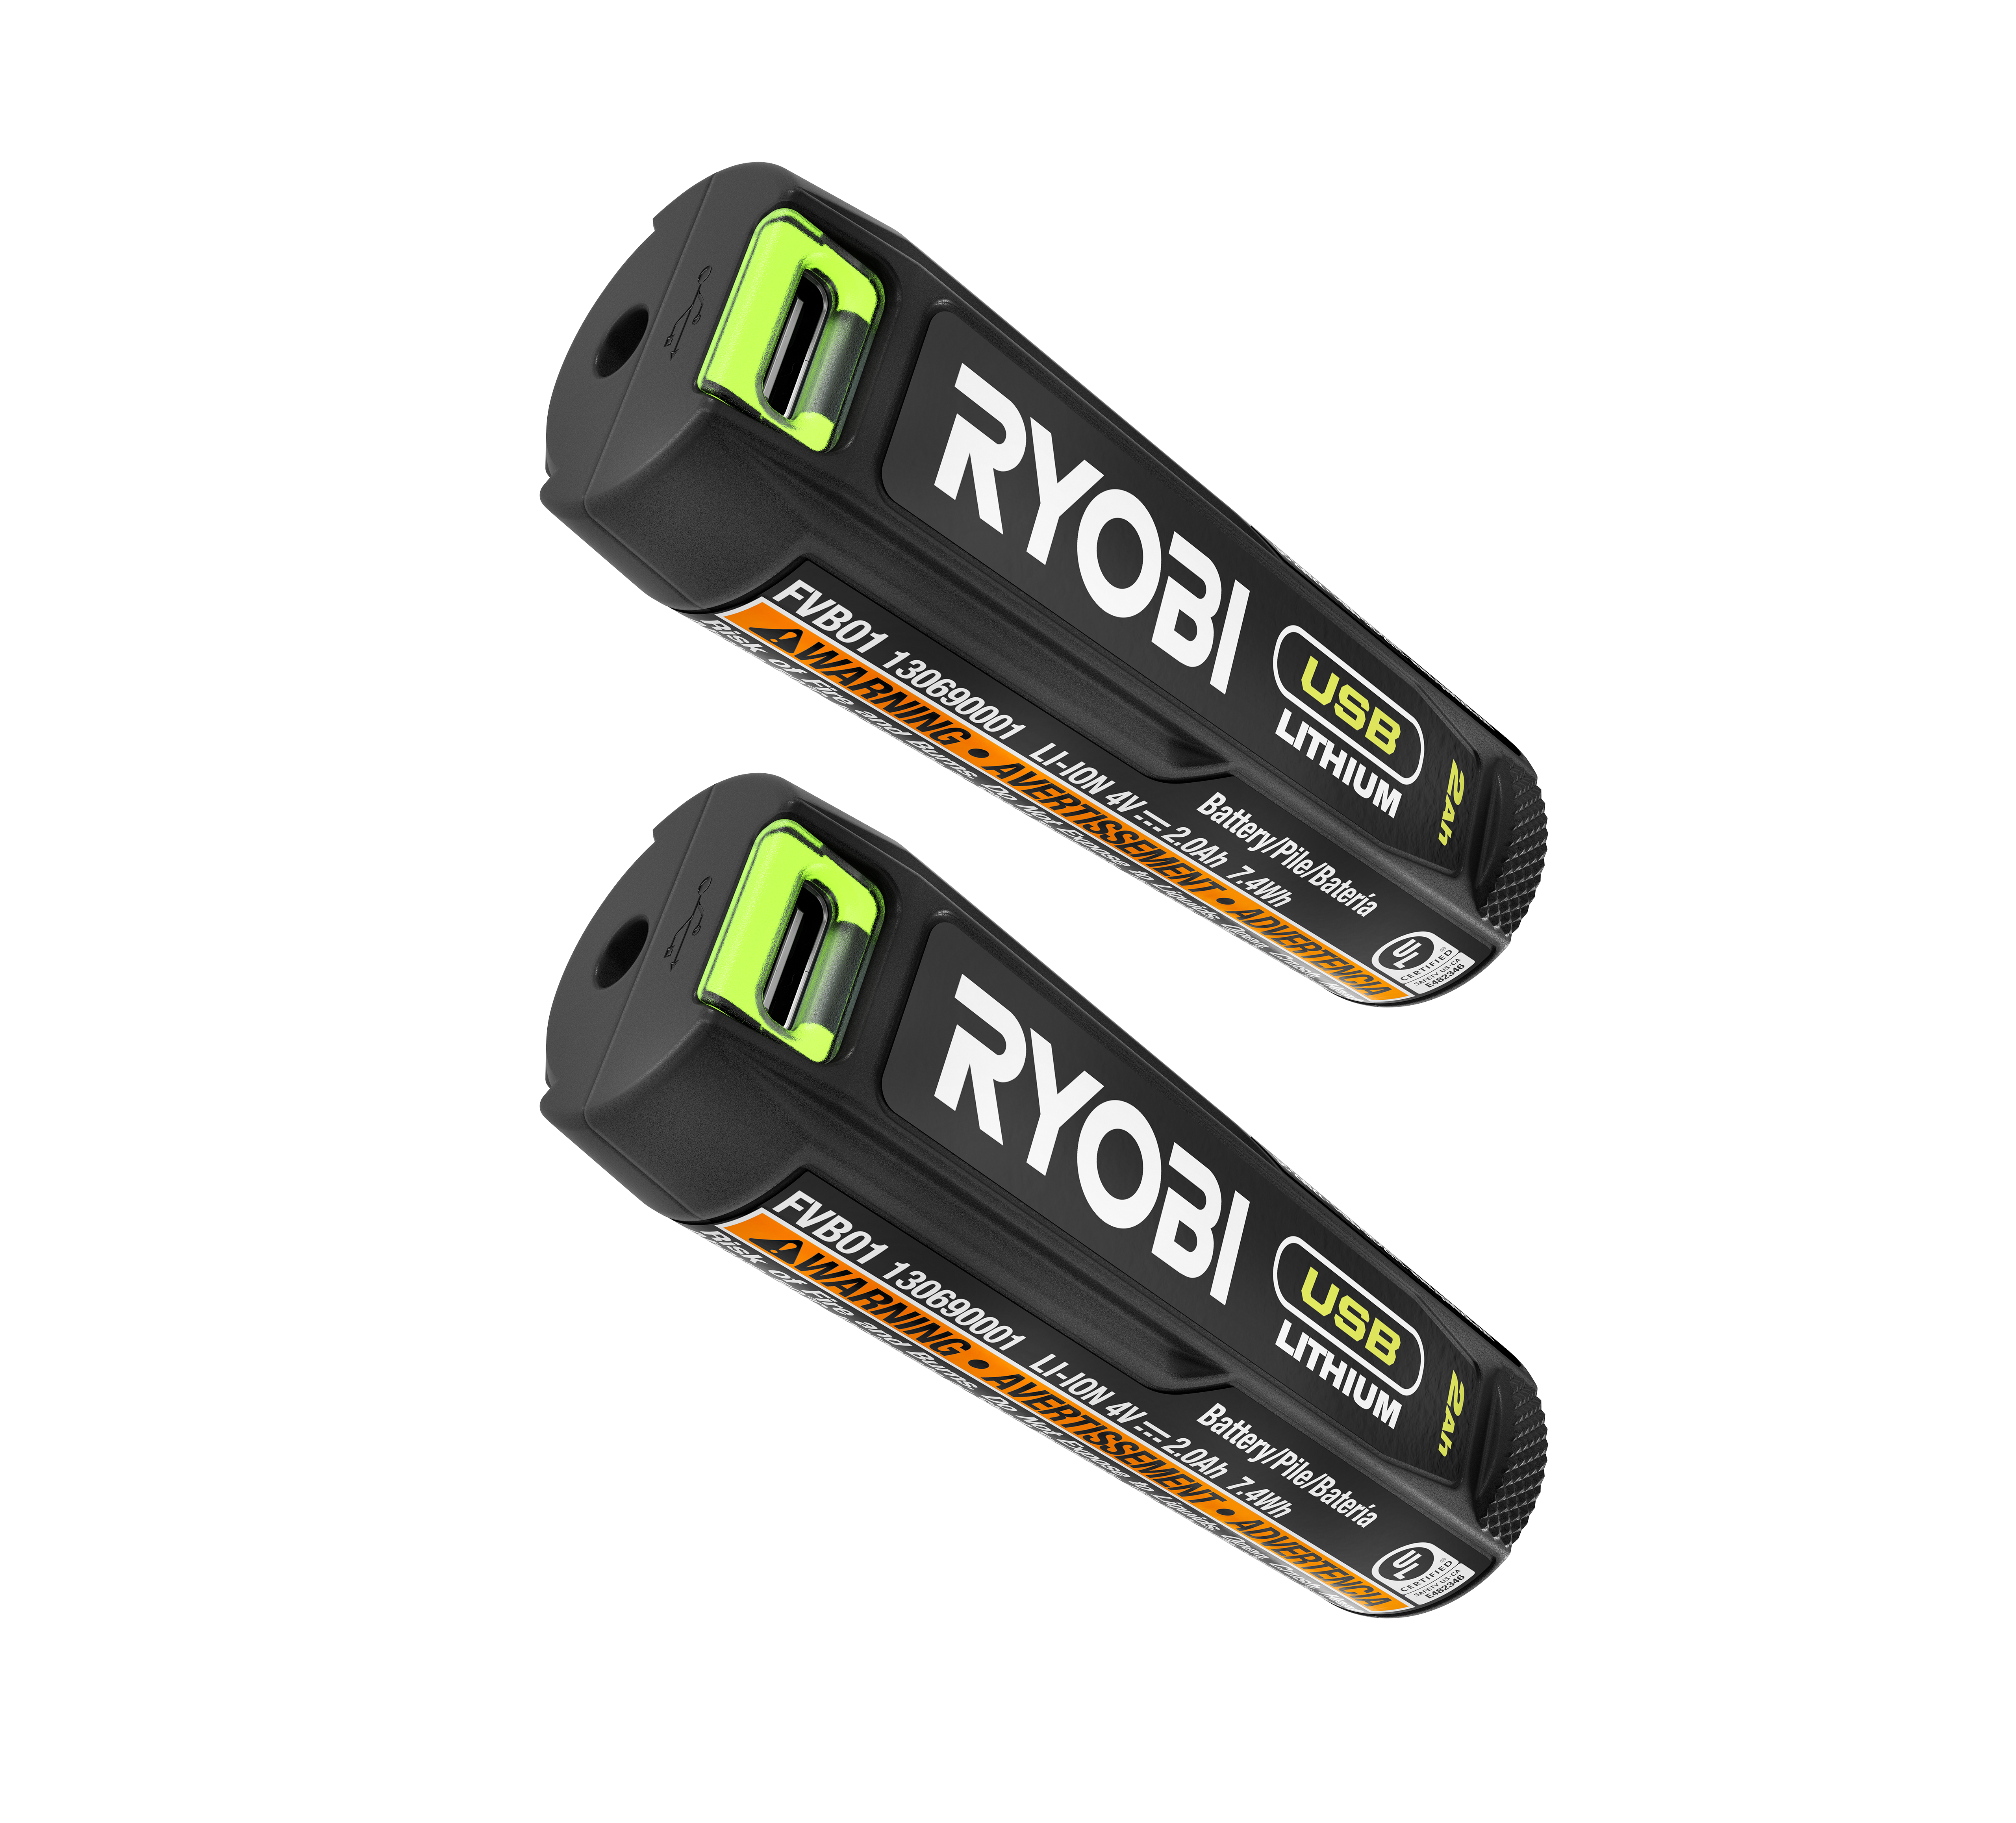 USB Lithium 2.0 Ah Rechargeable Batteries (2-Pack) | RYOBI Tools